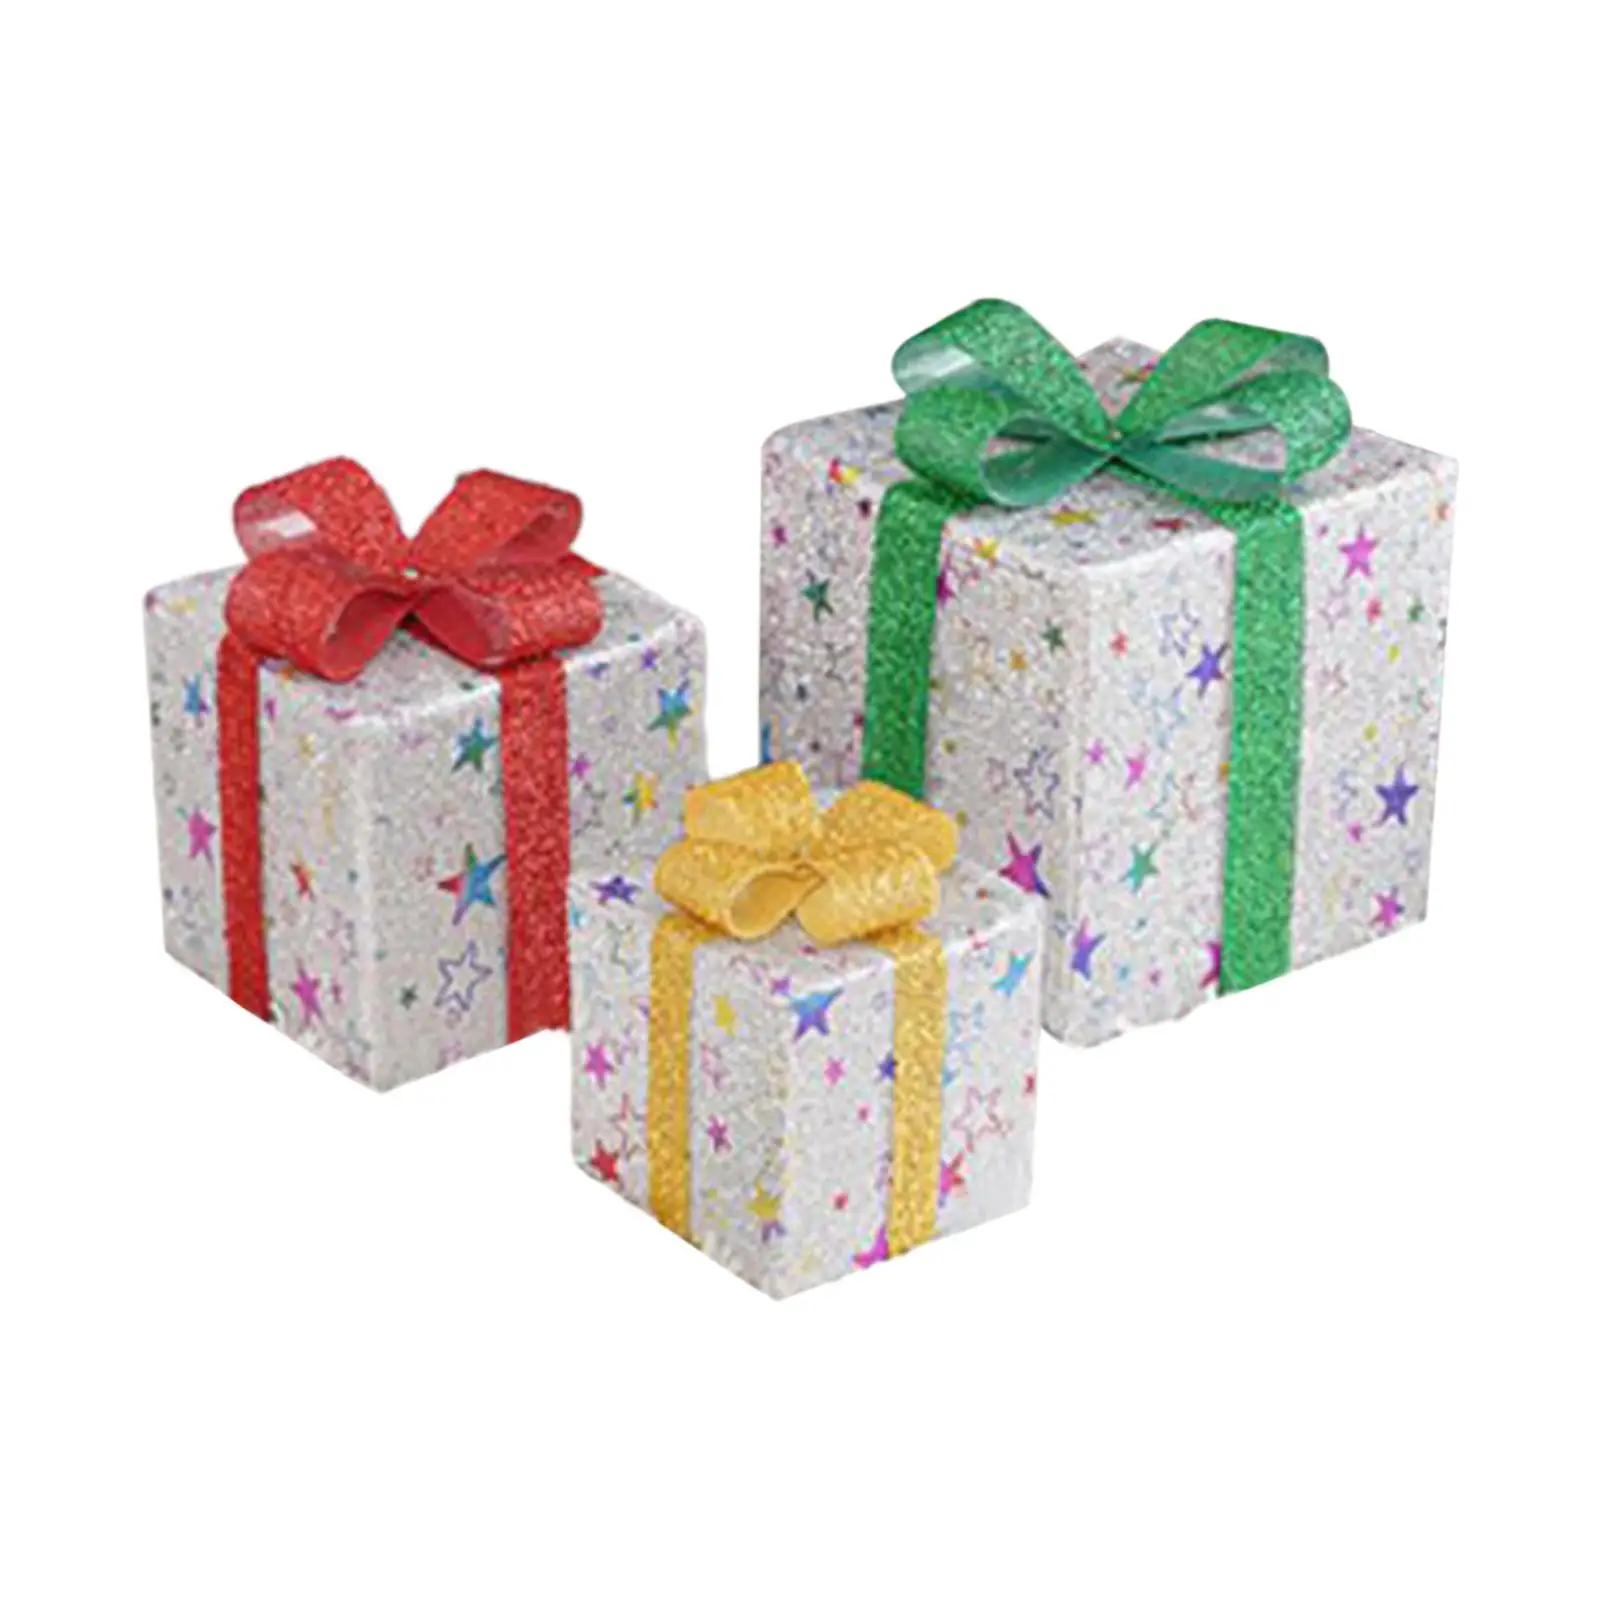 Set of 3 Christmas Lighted Gift Boxes Lightweight Romantic Multipurpose with 3 Different Sizes for Outdoor Covered Porch